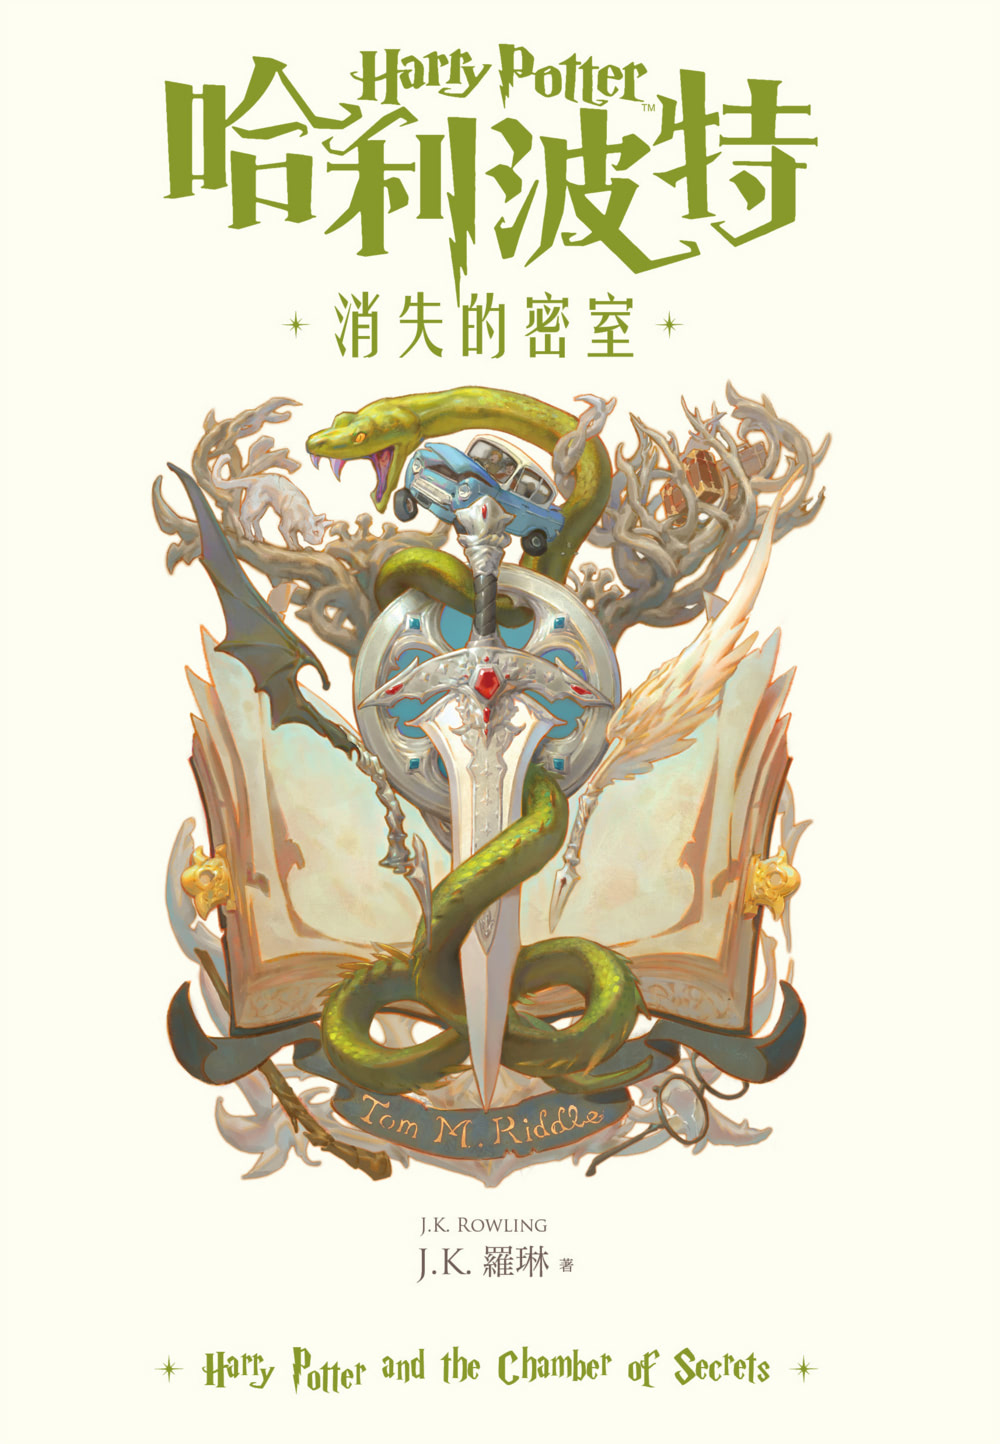 ‘Chamber of Secrets’ Traditional Chinese 20th anniversary edition